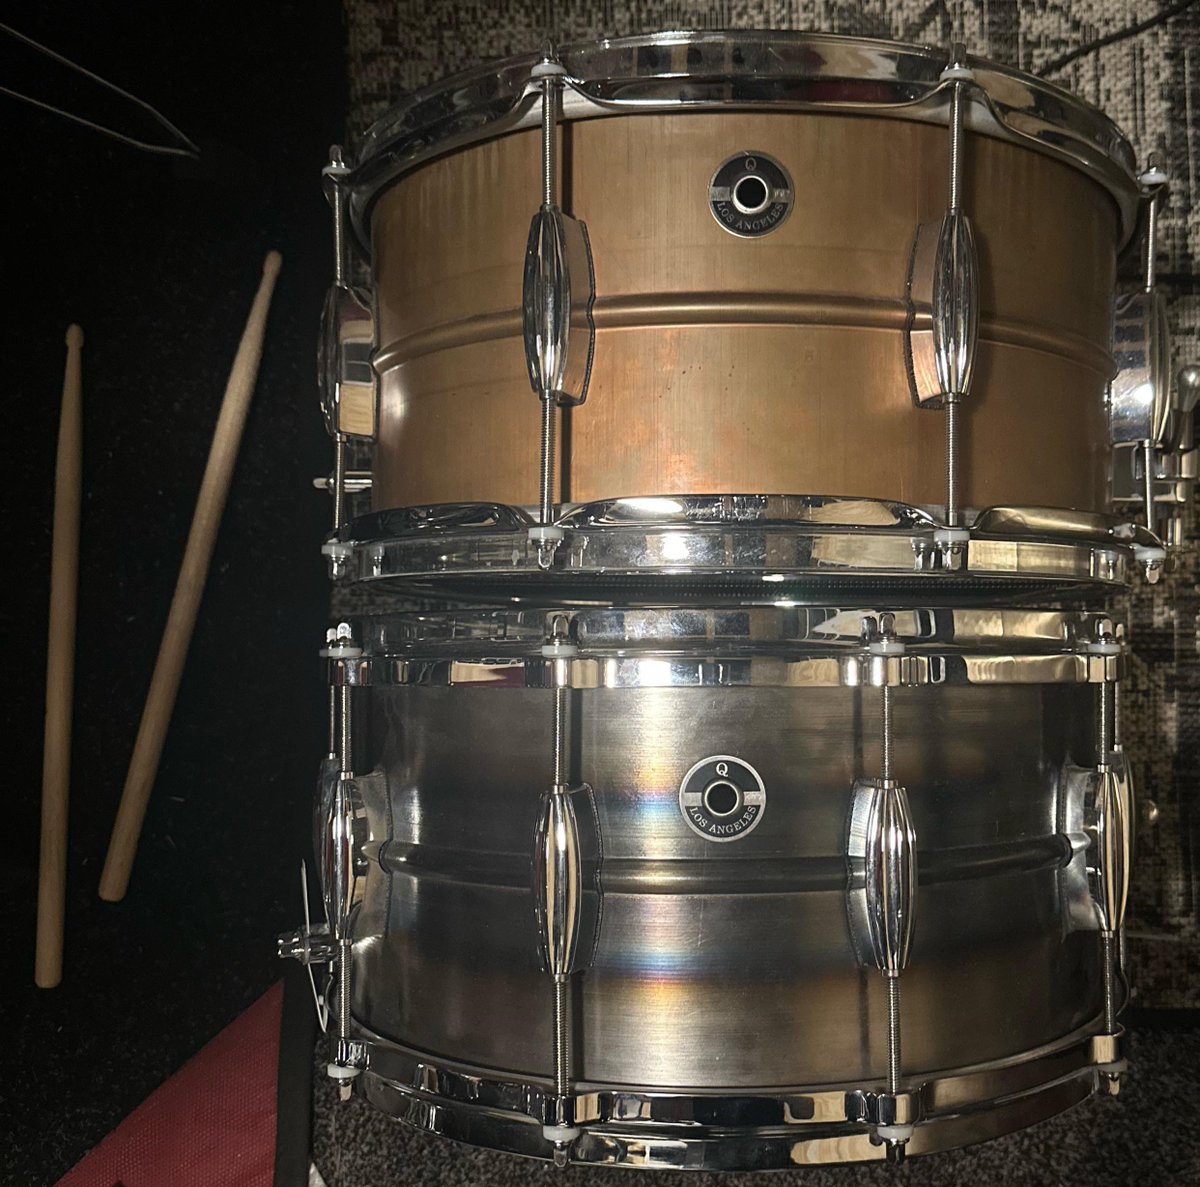 Q Drum Co. Snares 7x14 Gentleman’s Copper and Steel [by Shredshed_slc]
  
 #percussion #beats